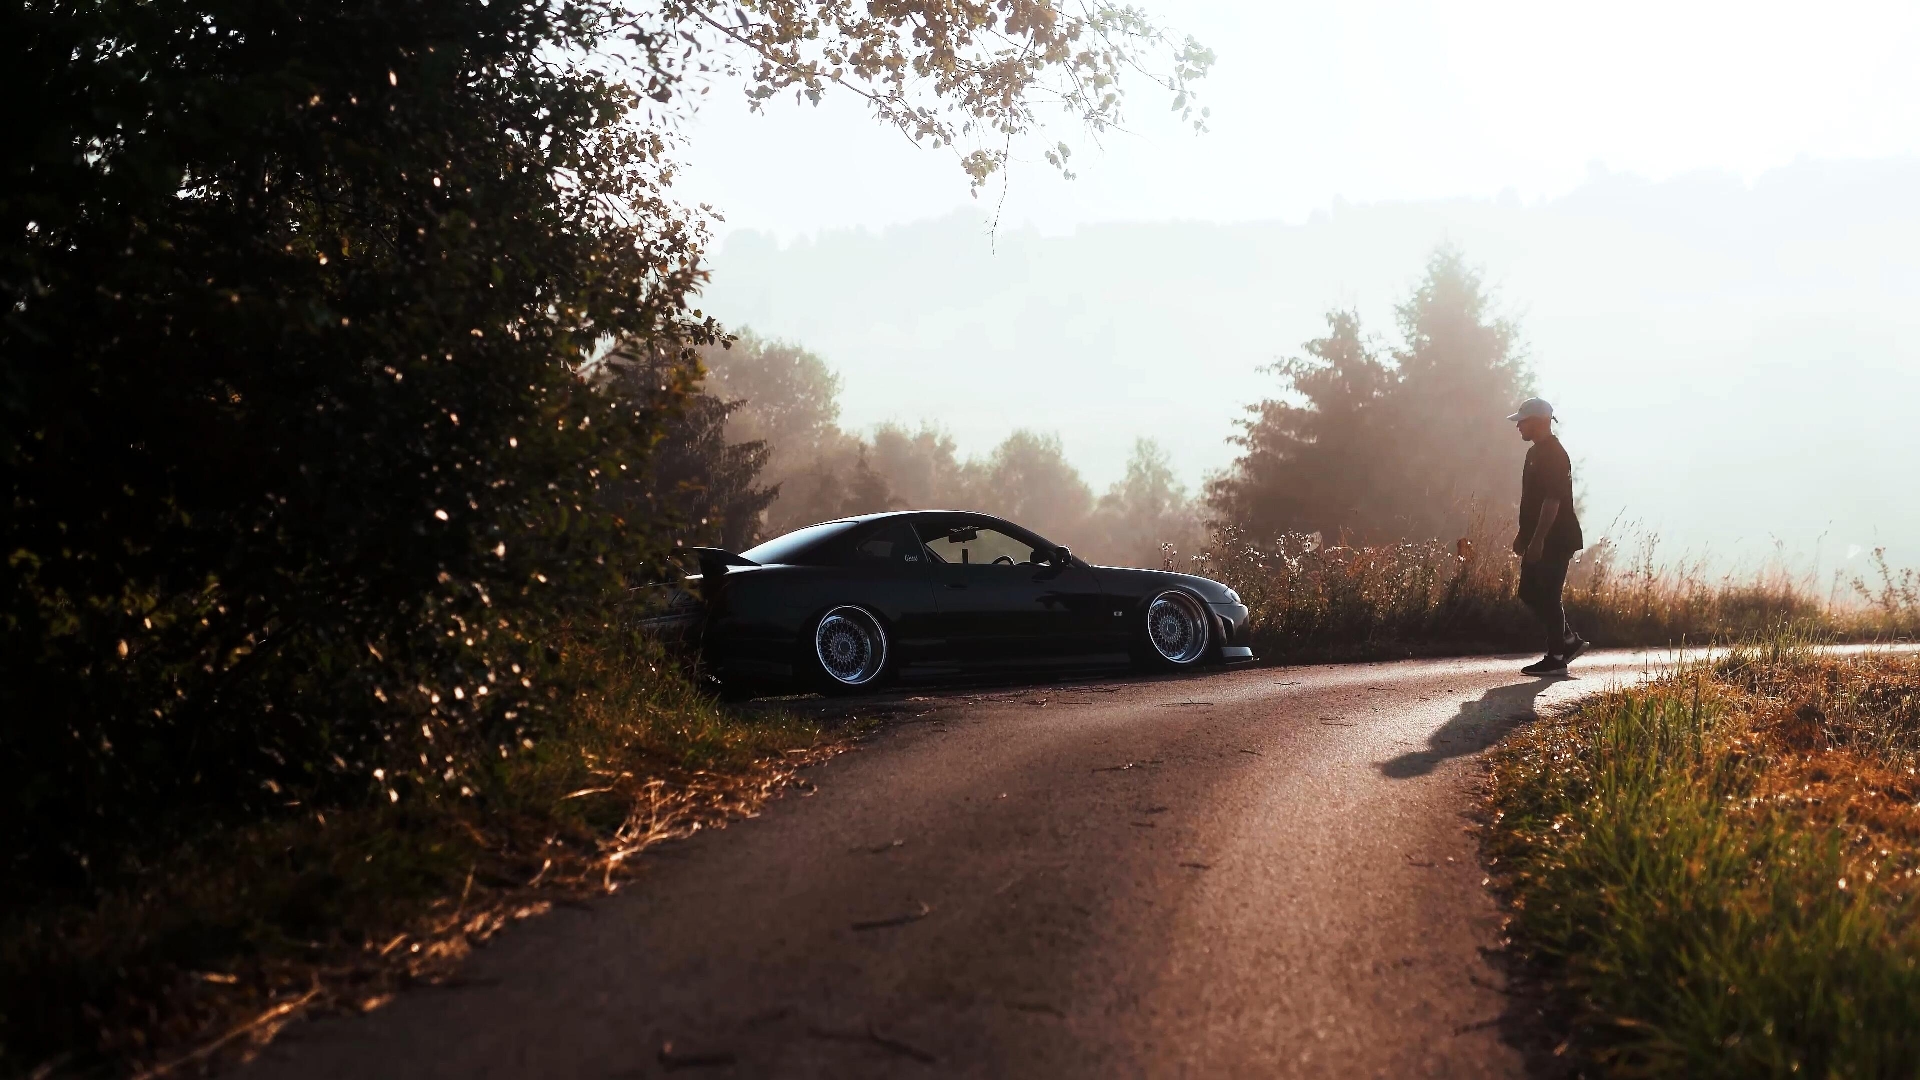 General 1920x1080 Nissan Silvia S15 Japanese cars car side view shadow trees road